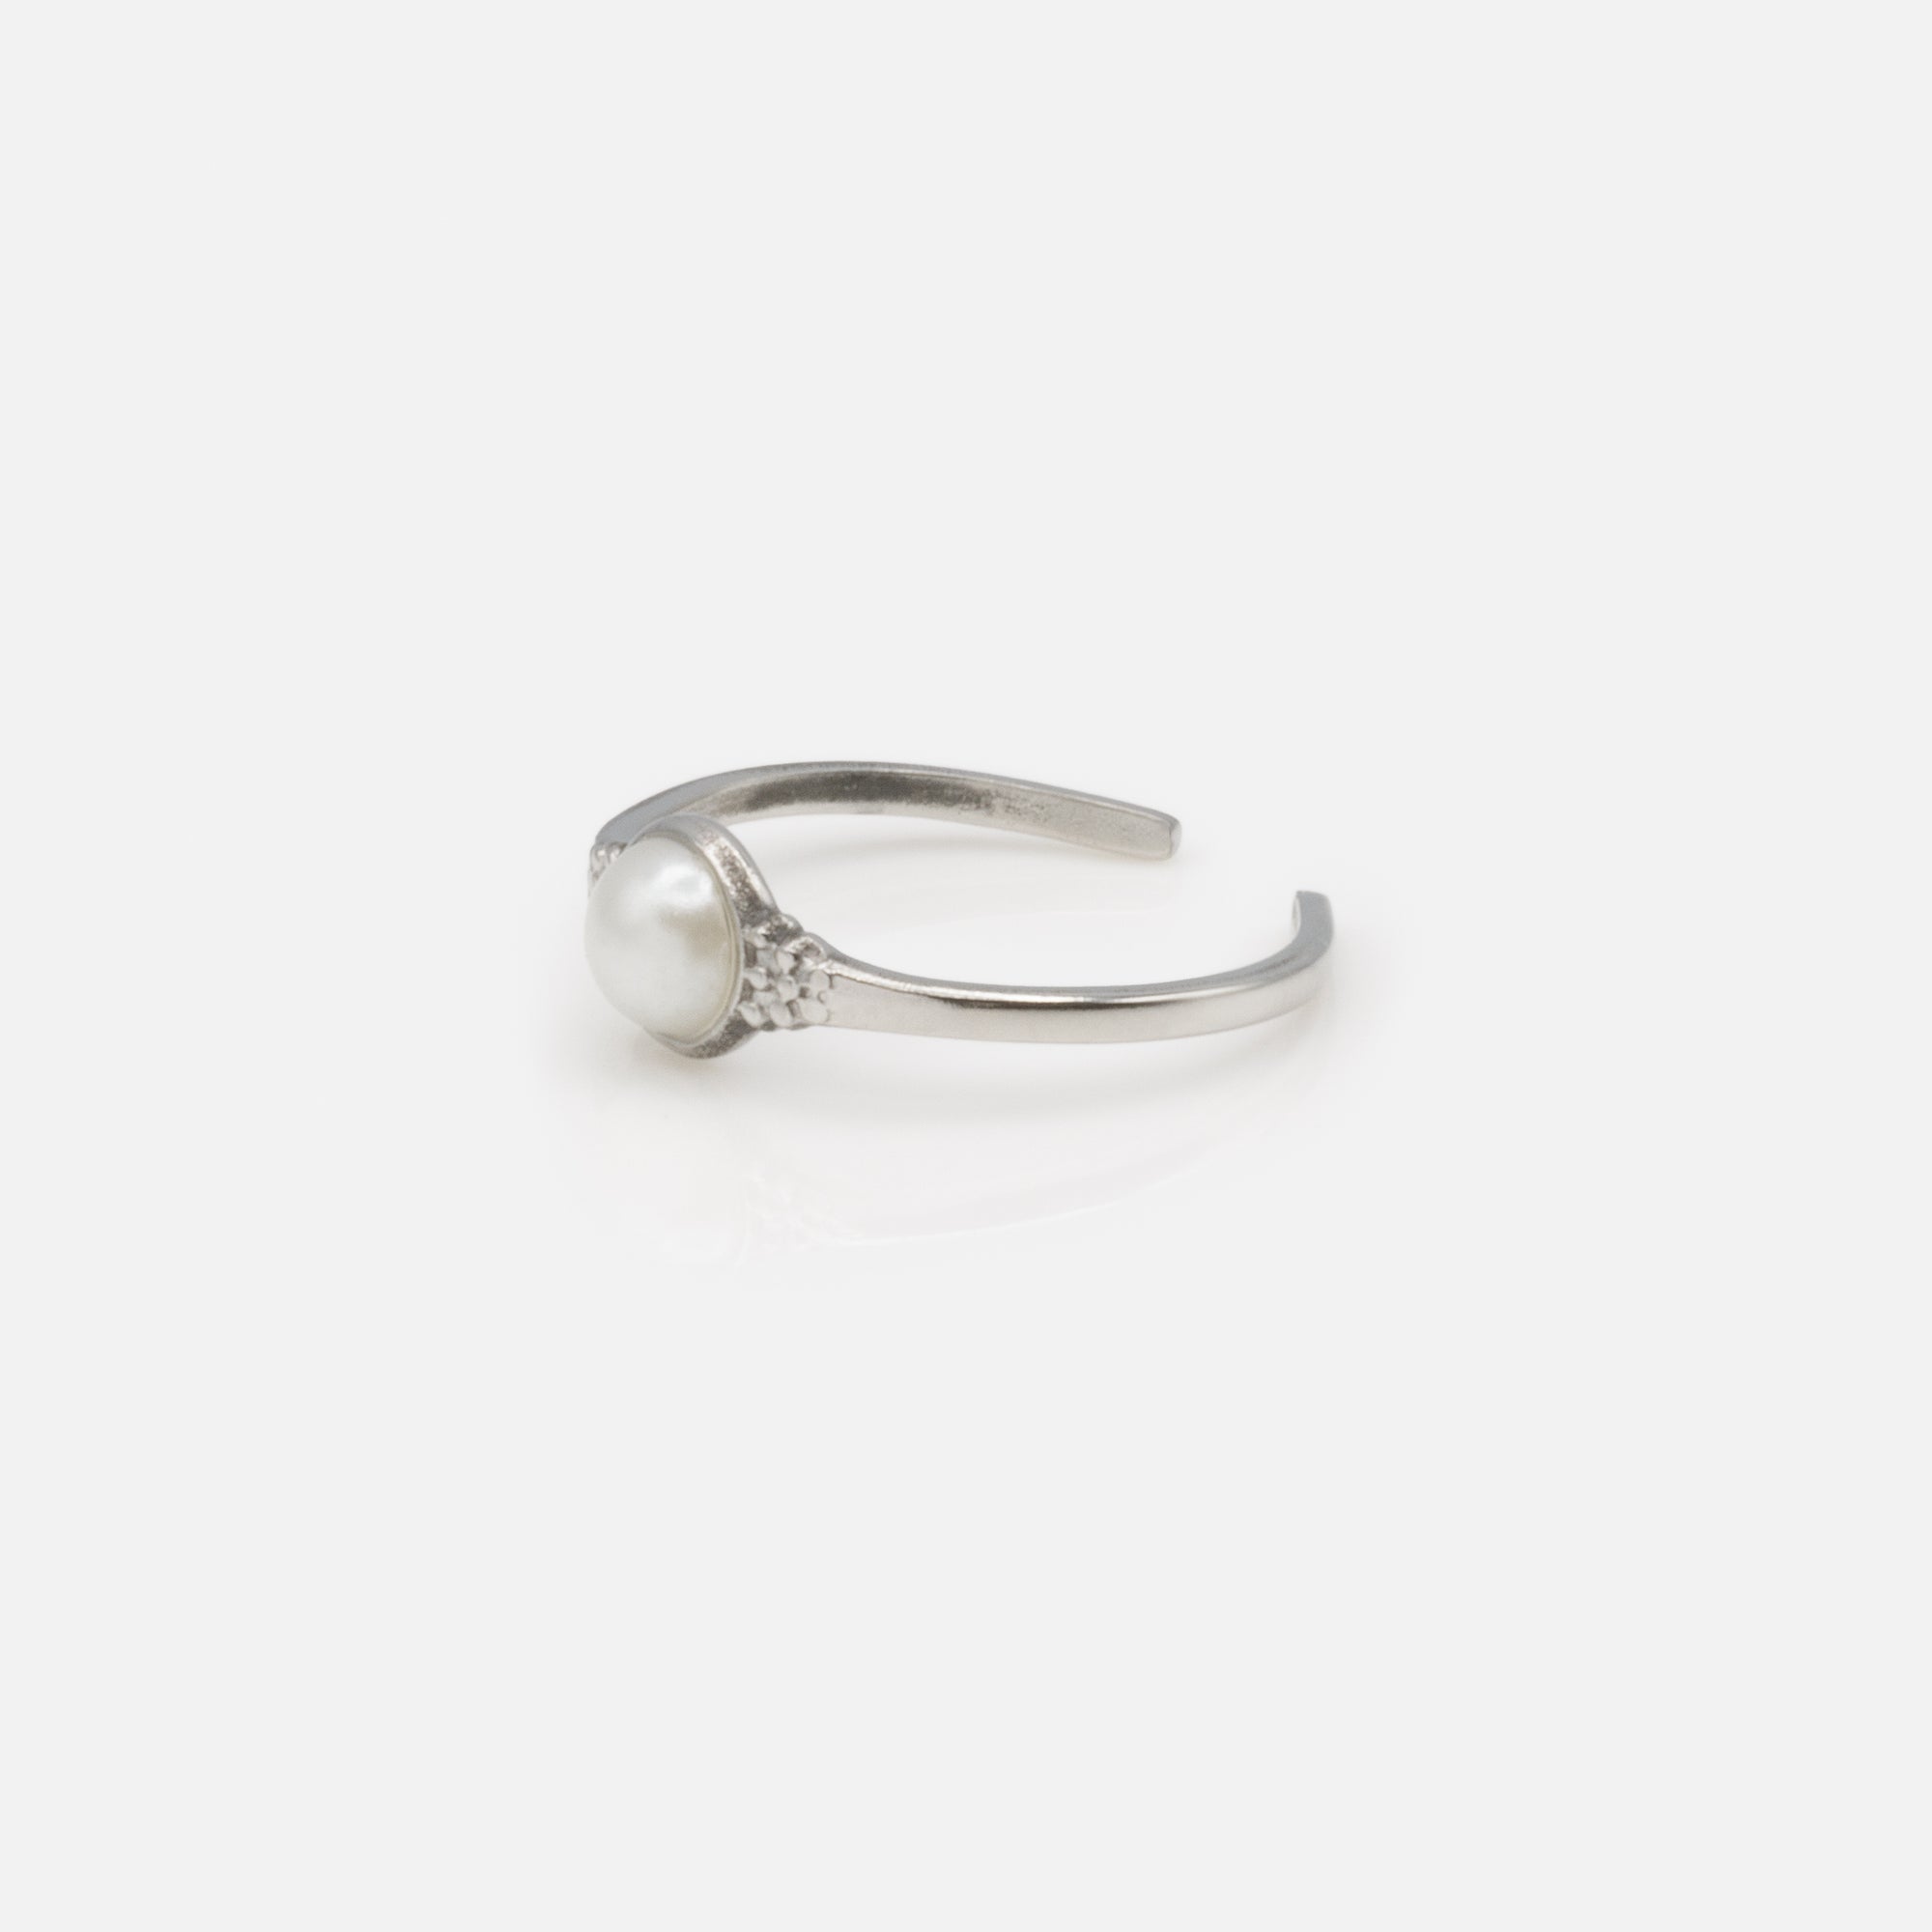 Silver open ring with stainless steel bead